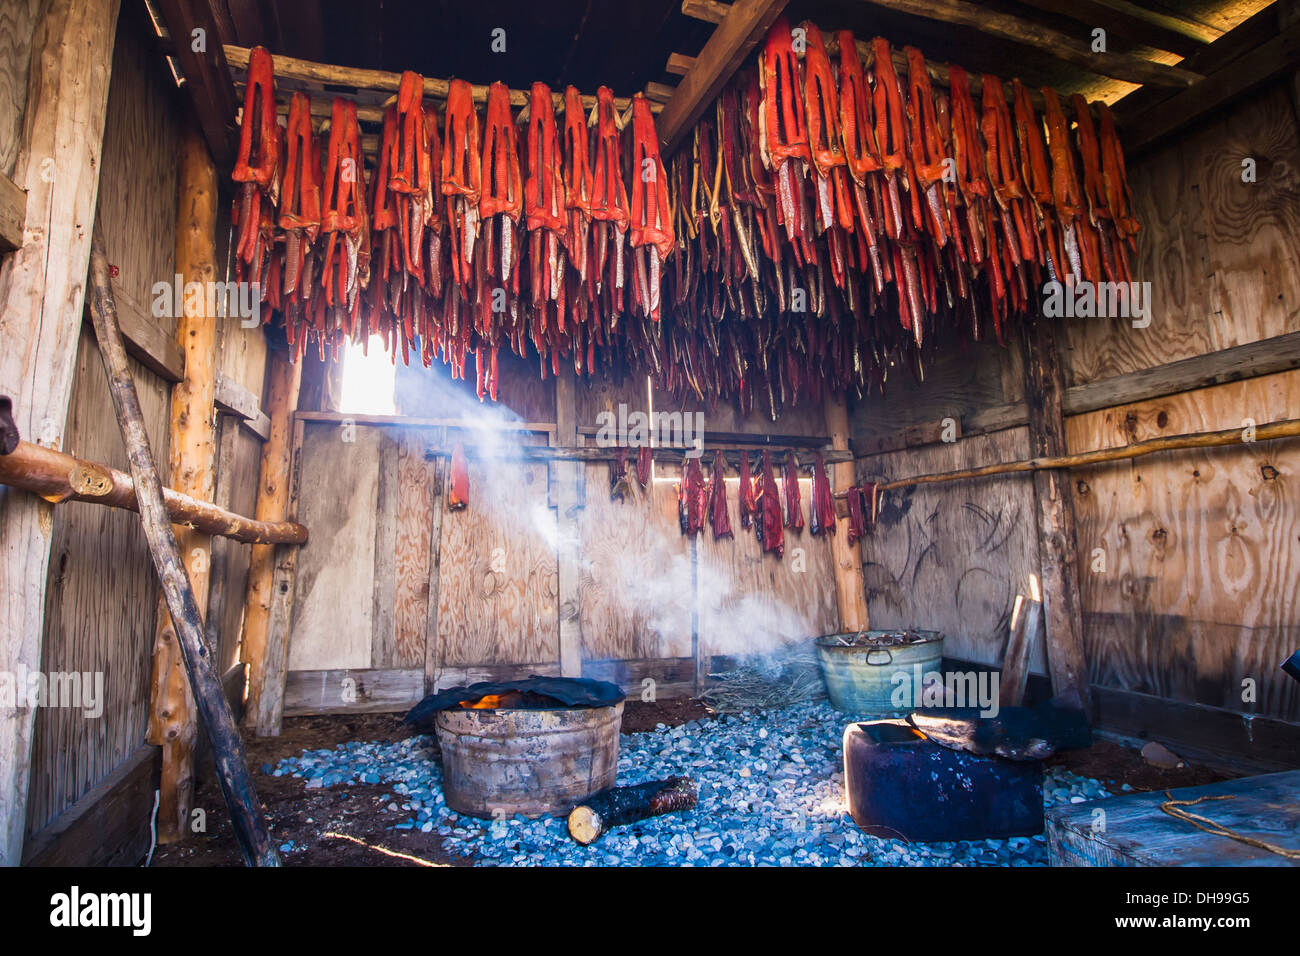 Strips Of Sockeye Salmon Hanging In A Large Smoker As A Shaft Of Light Streams In Showing The Smoke From The Fires. Alaska Stock Photo